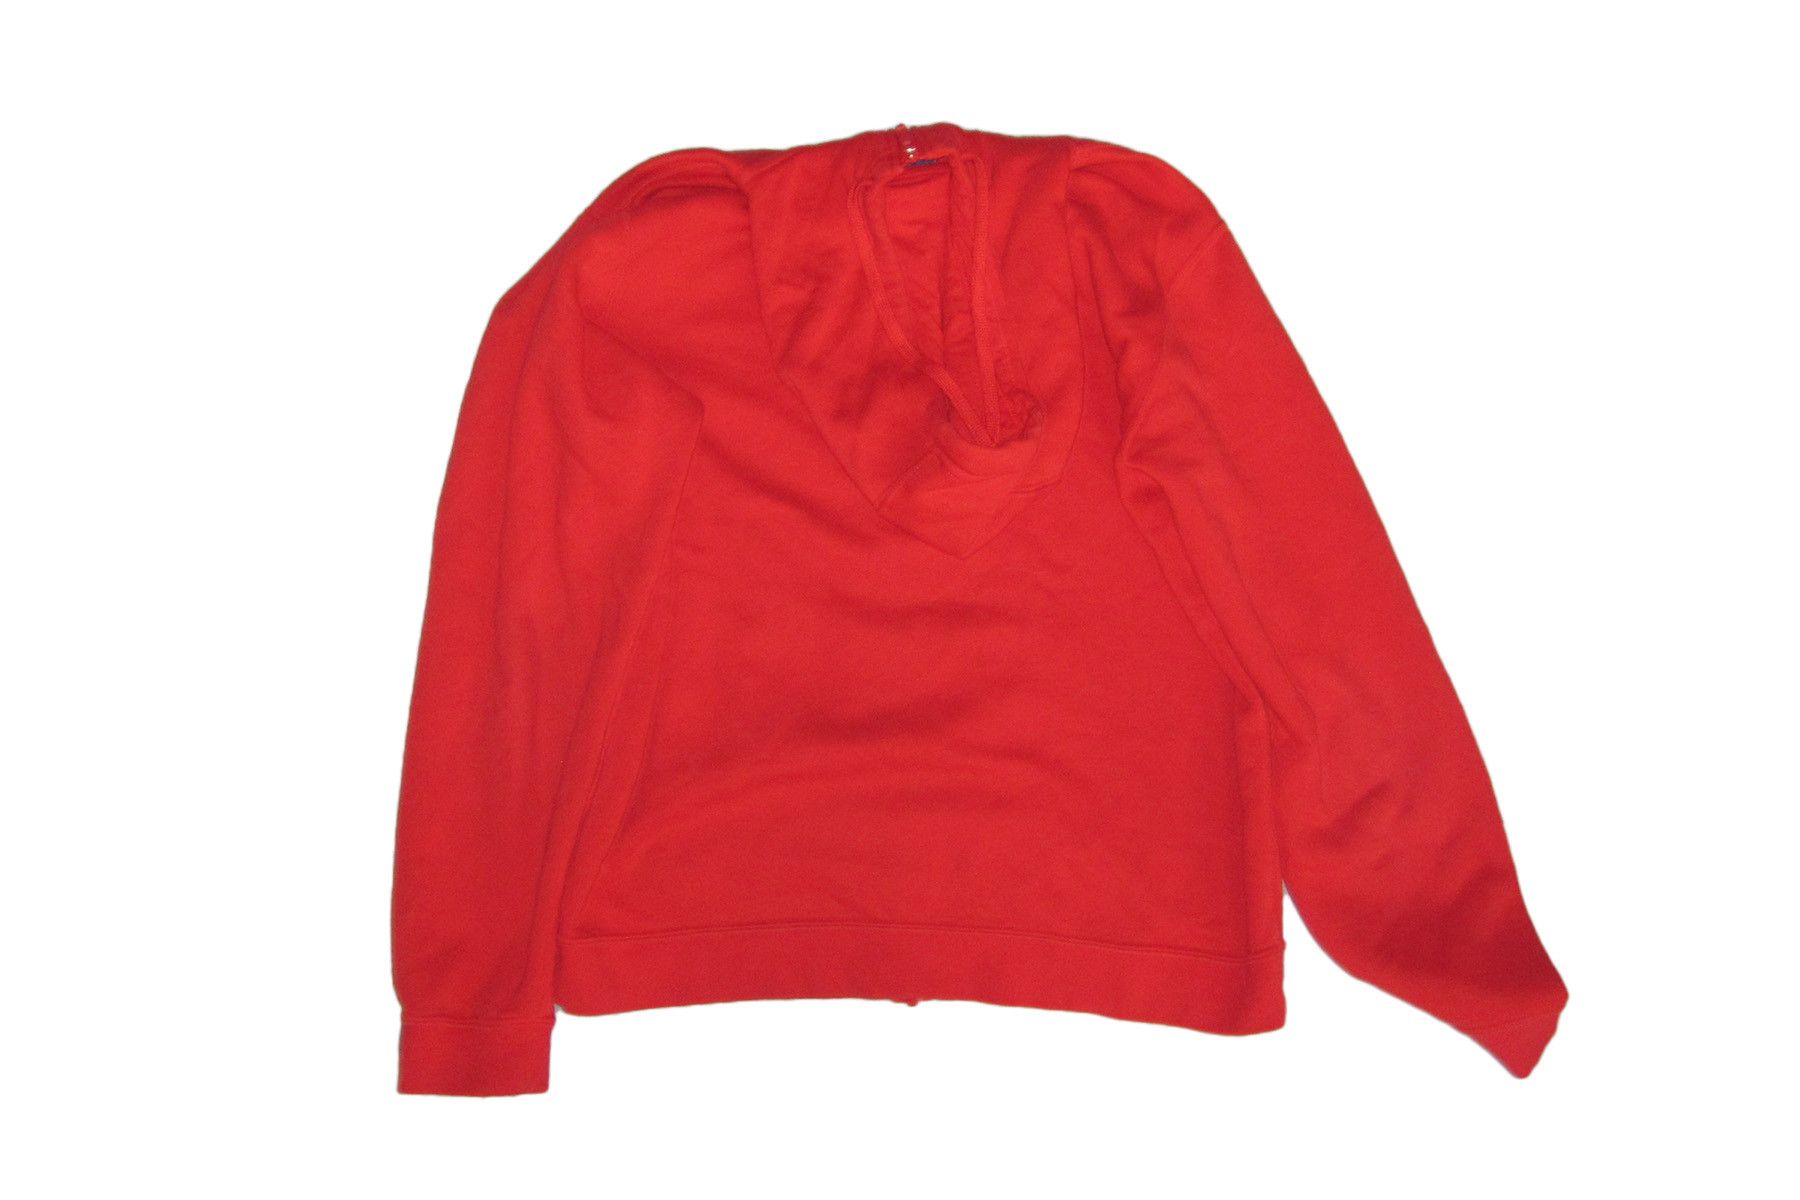 Nike Red Nike Zip Up Hoodie Size US L / EU 52-54 / 3 - 2 Preview